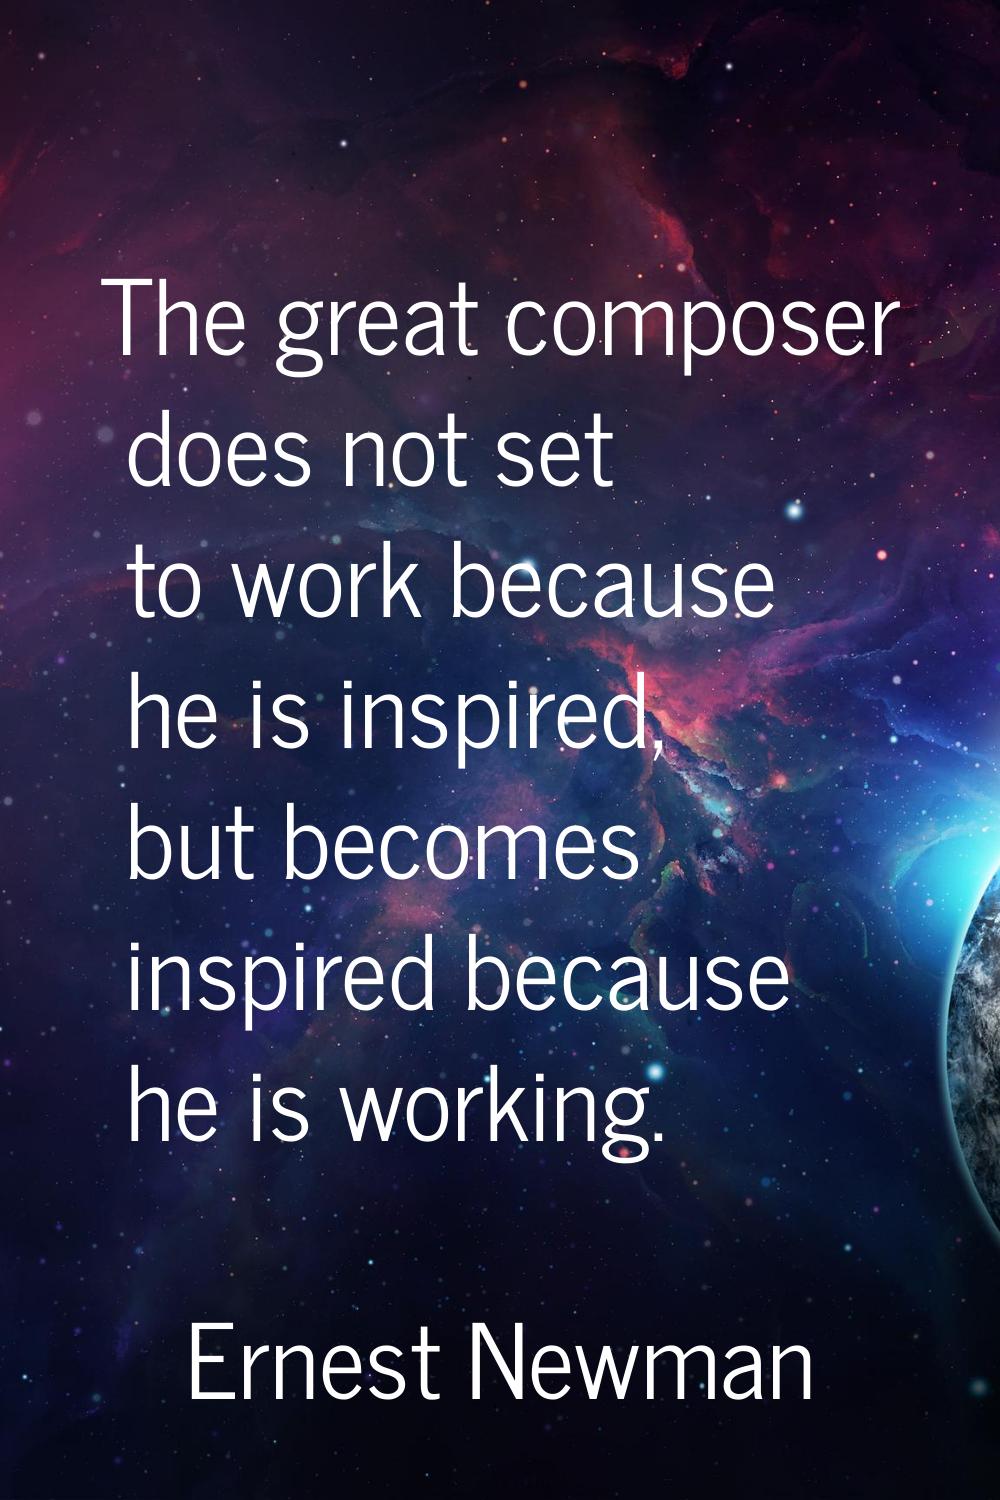 The great composer does not set to work because he is inspired, but becomes inspired because he is 